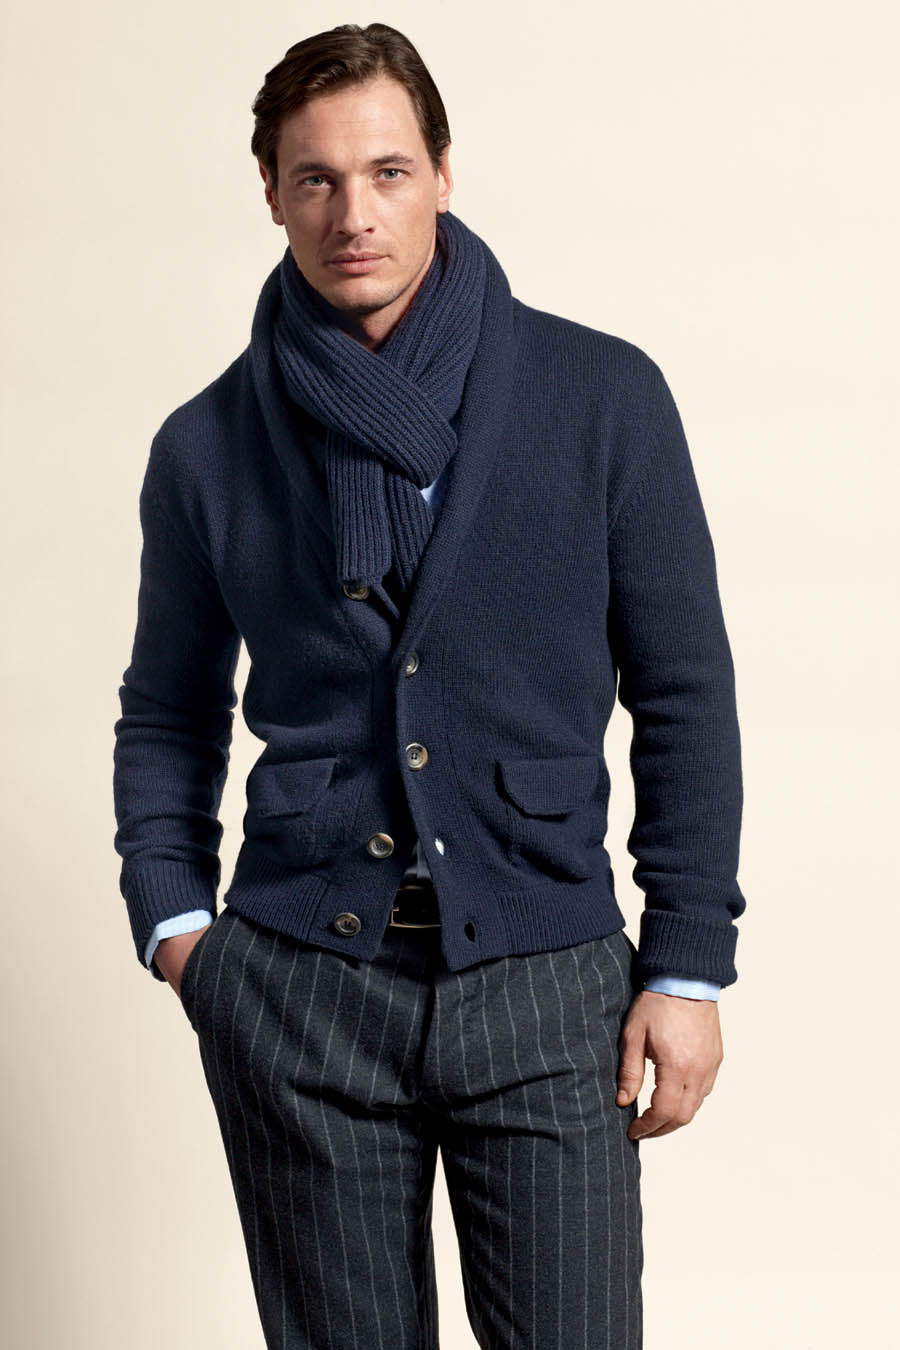 Façonnable Fall 2011 Men’s Collection – FashionWindows Network